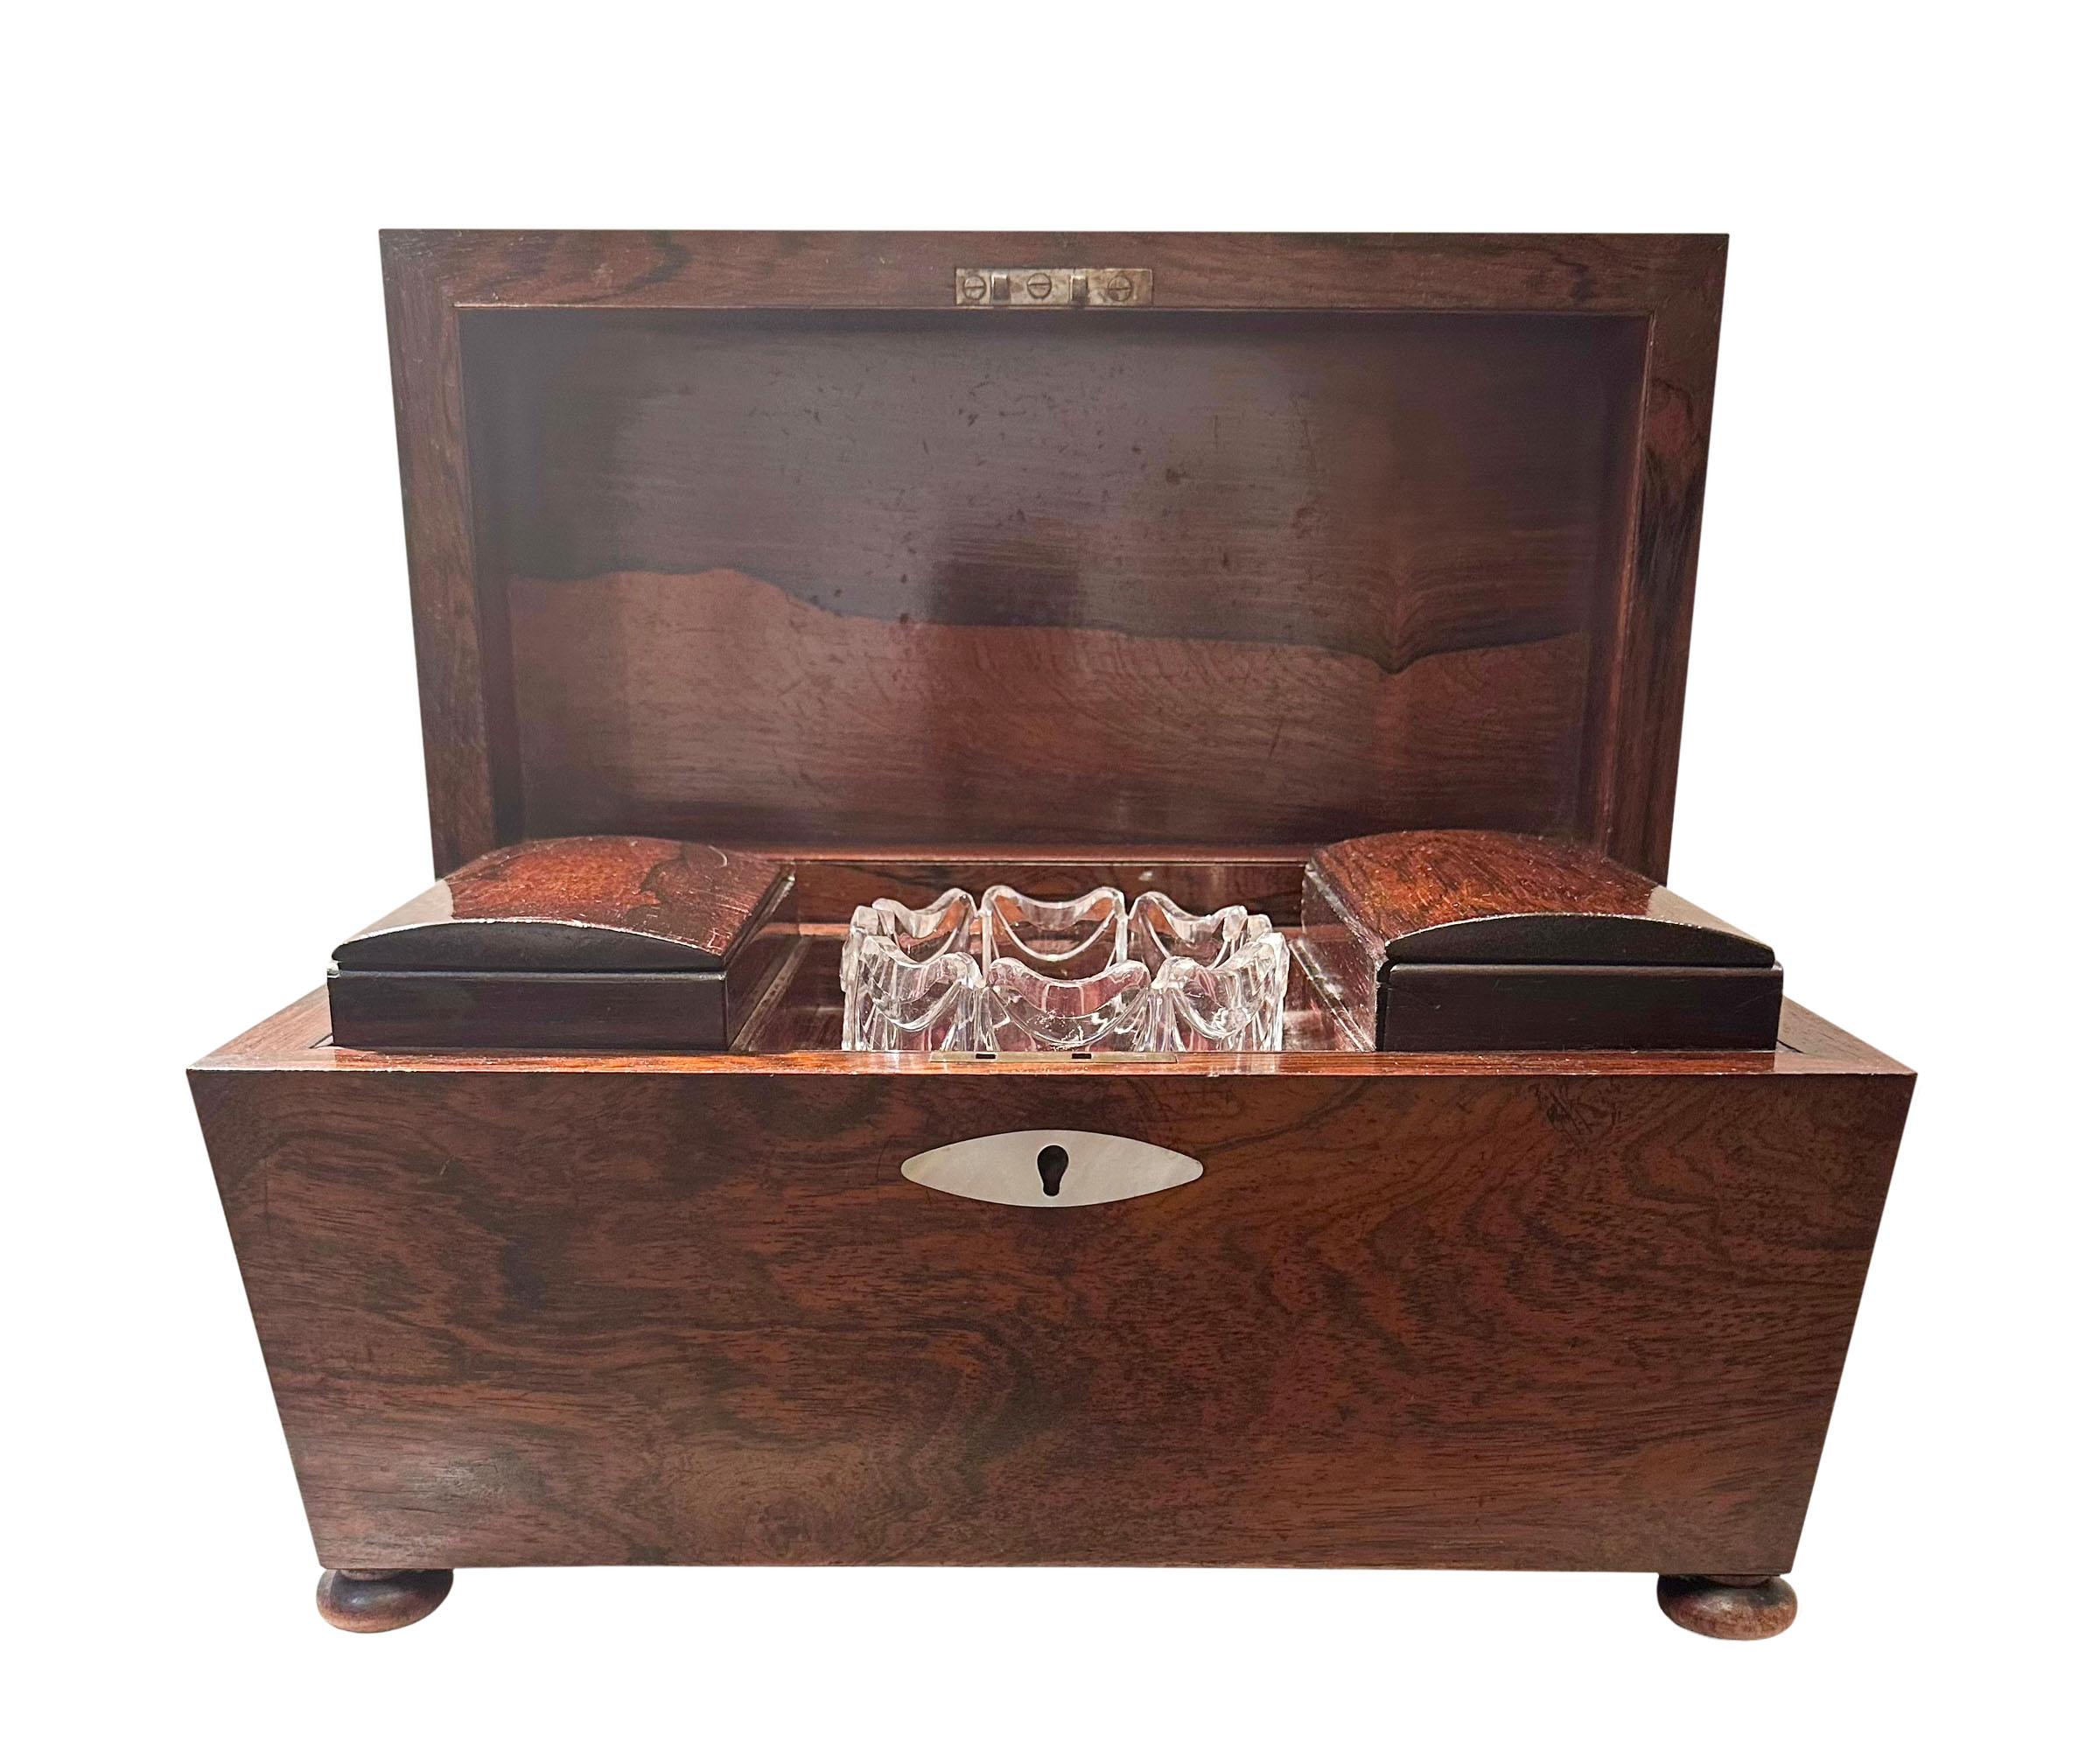 A large sarcophagus shaped rosewood tea caddy with a semi domed top. Original glass inside and two tea compartments. Mother of pearl inlaid escutcheon. On bun feet. The interior is five inches deep with each tea compartment four and a half inches.